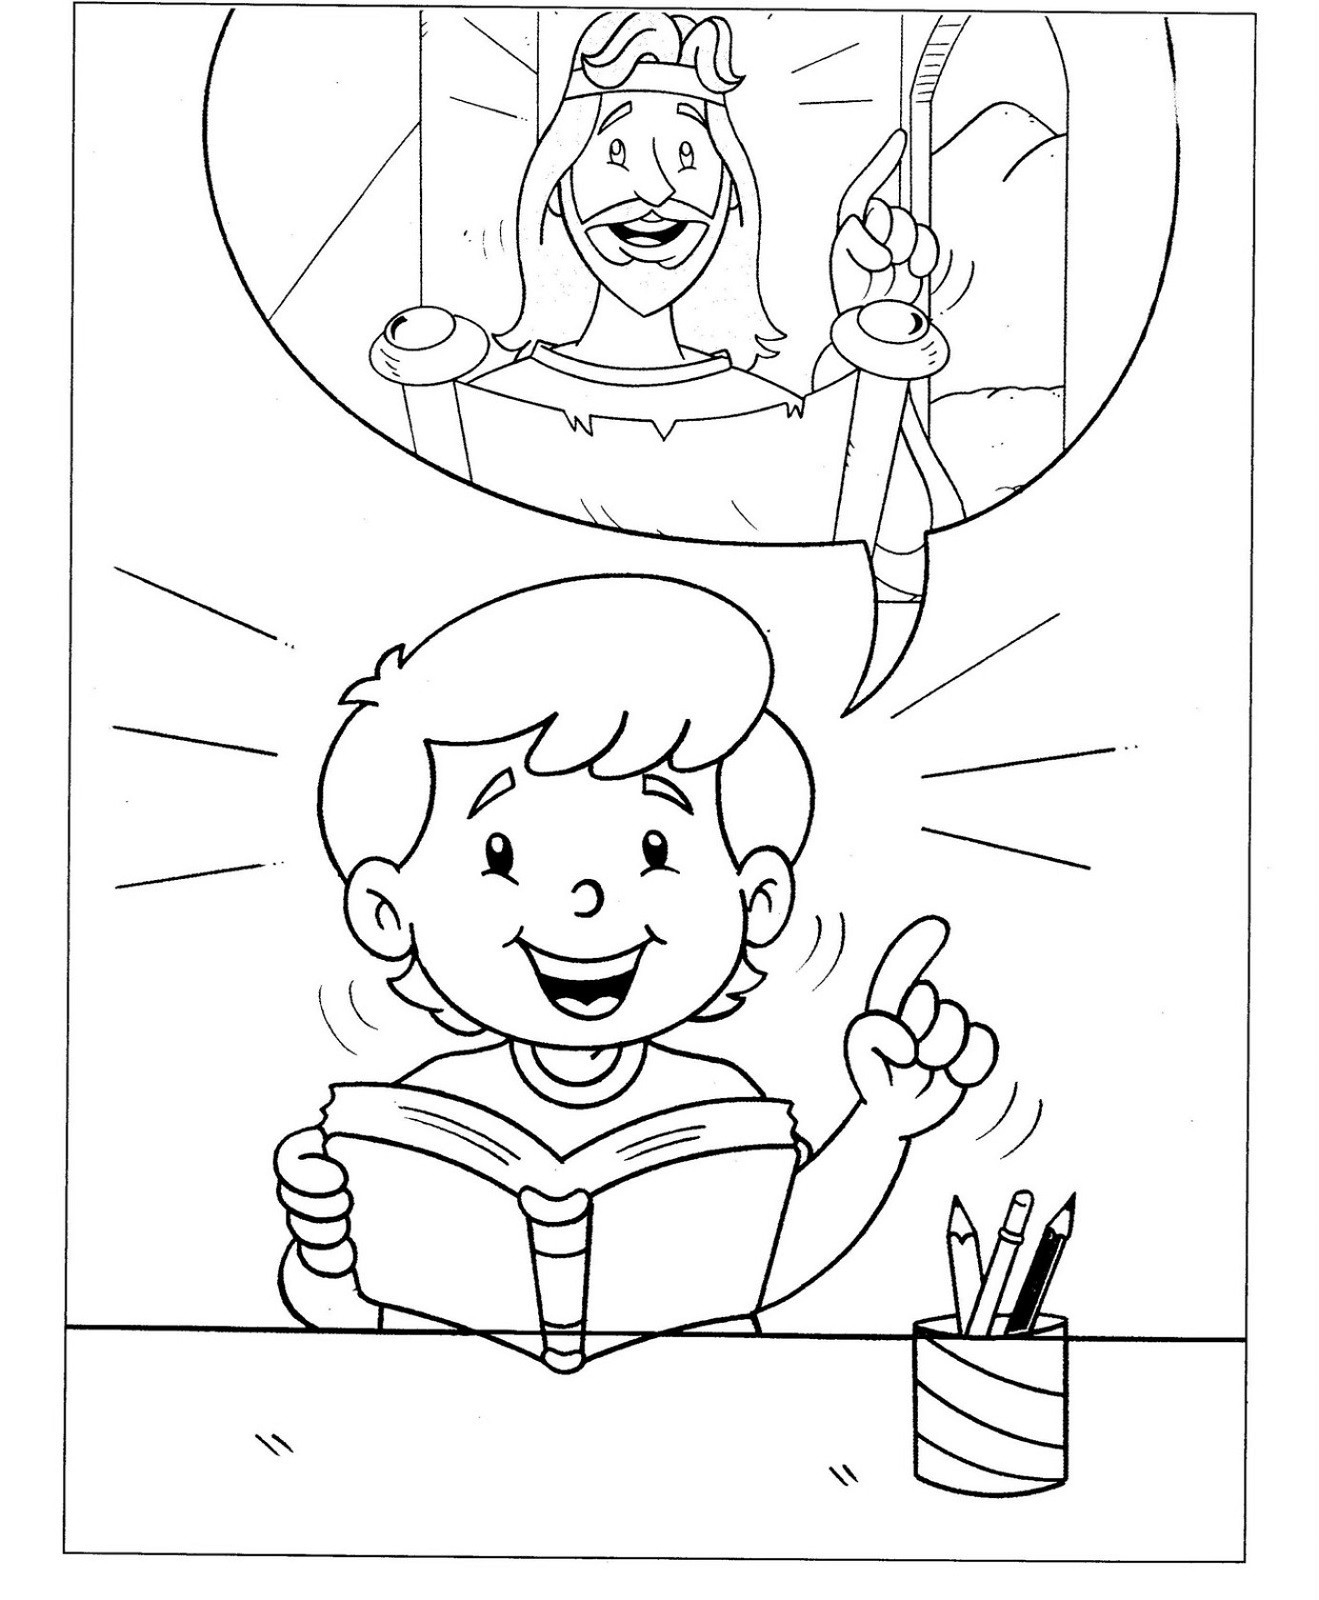 Christian Coloring Pages For Toddlers
 Christian Coloring Pages for Kids and Adults